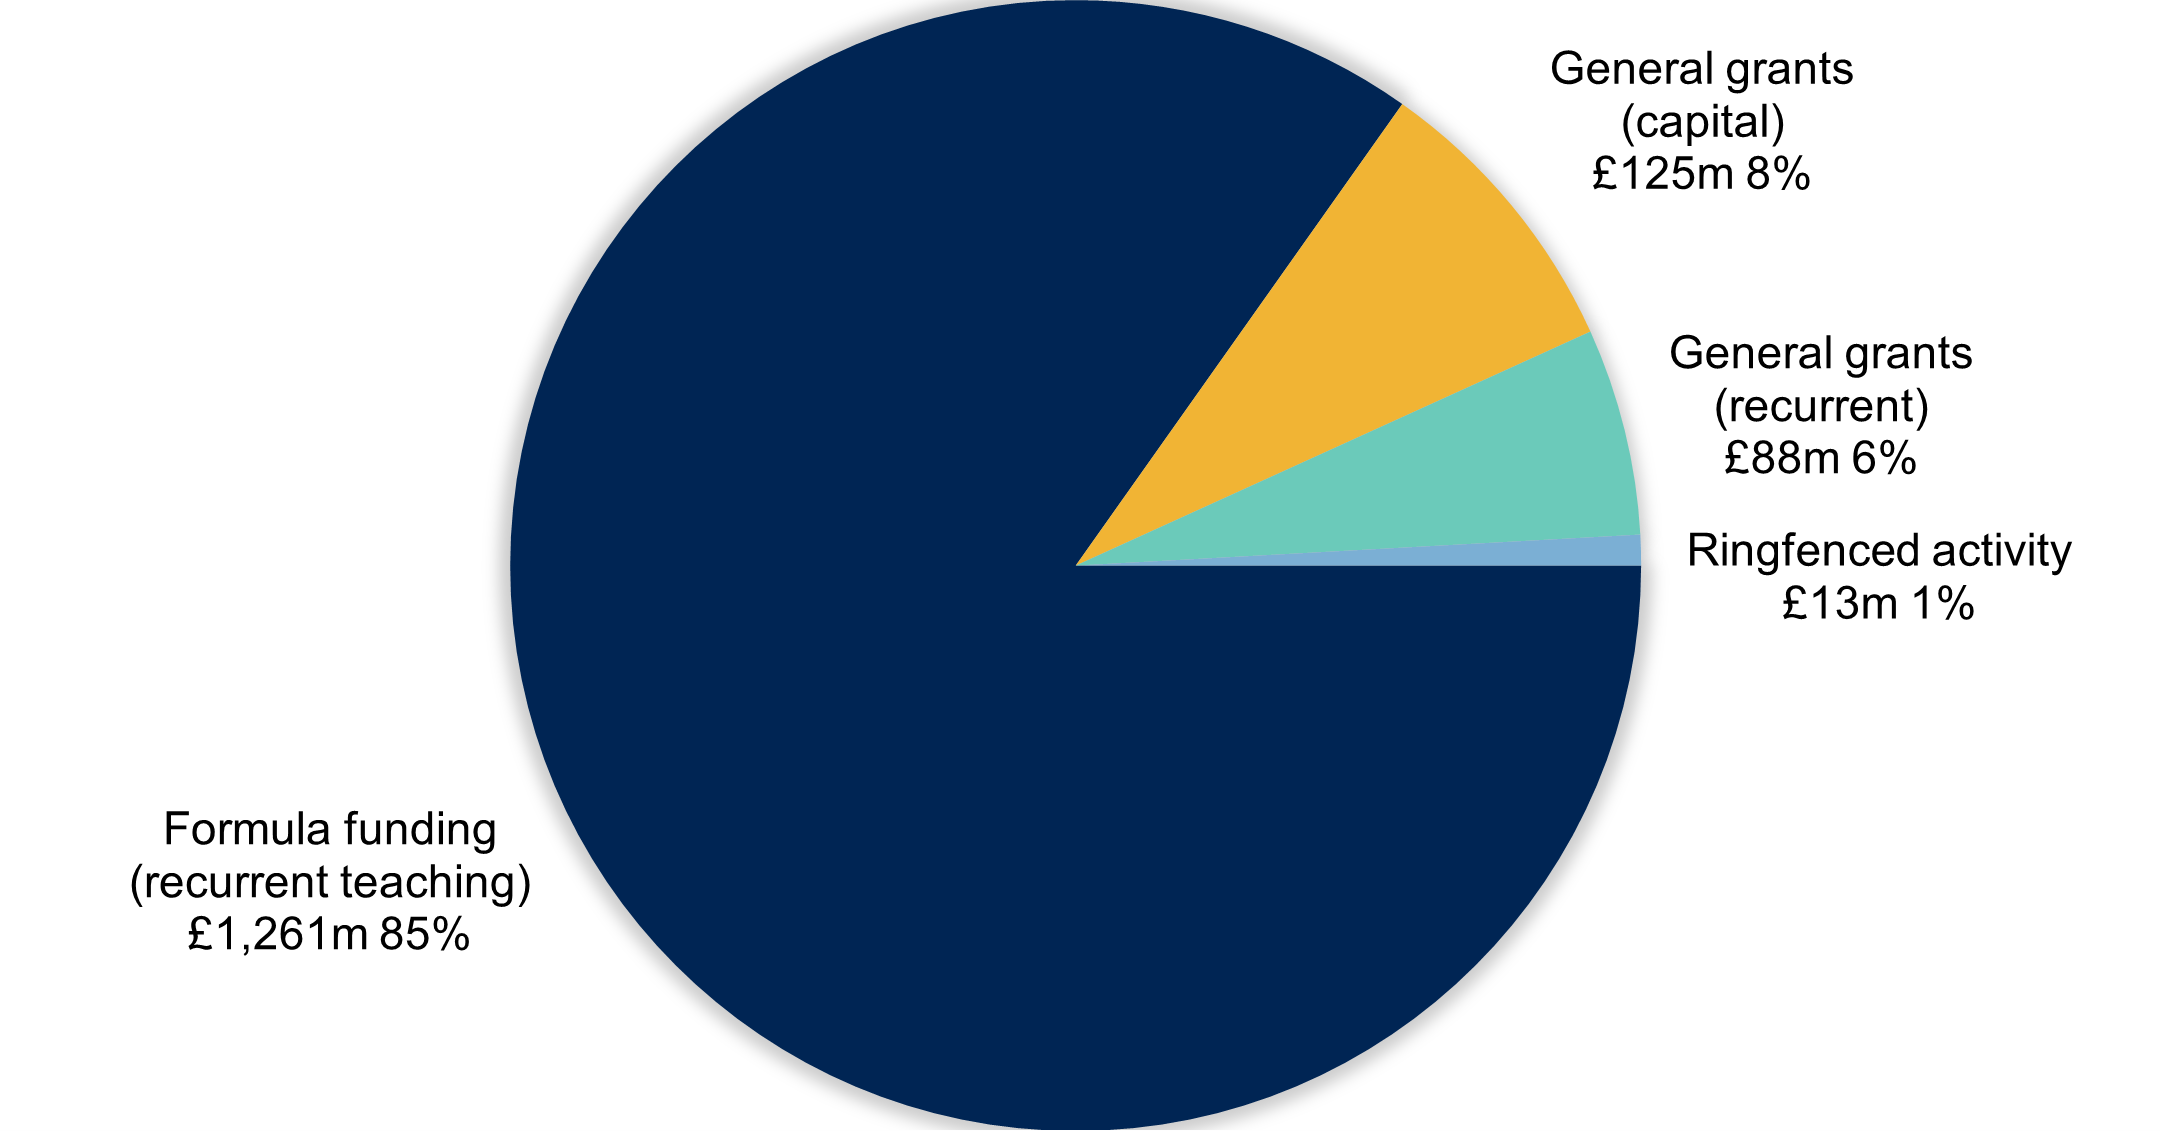 Figure 3 shows that the £1,487 million programme spend budget includes: £1,261 million (85%) formula funding (recurrent teaching); £125 million (8%) in general capital grants; £88 million (6%) in general recurrent grants; and £13 million (1%) in ringfenced activity.